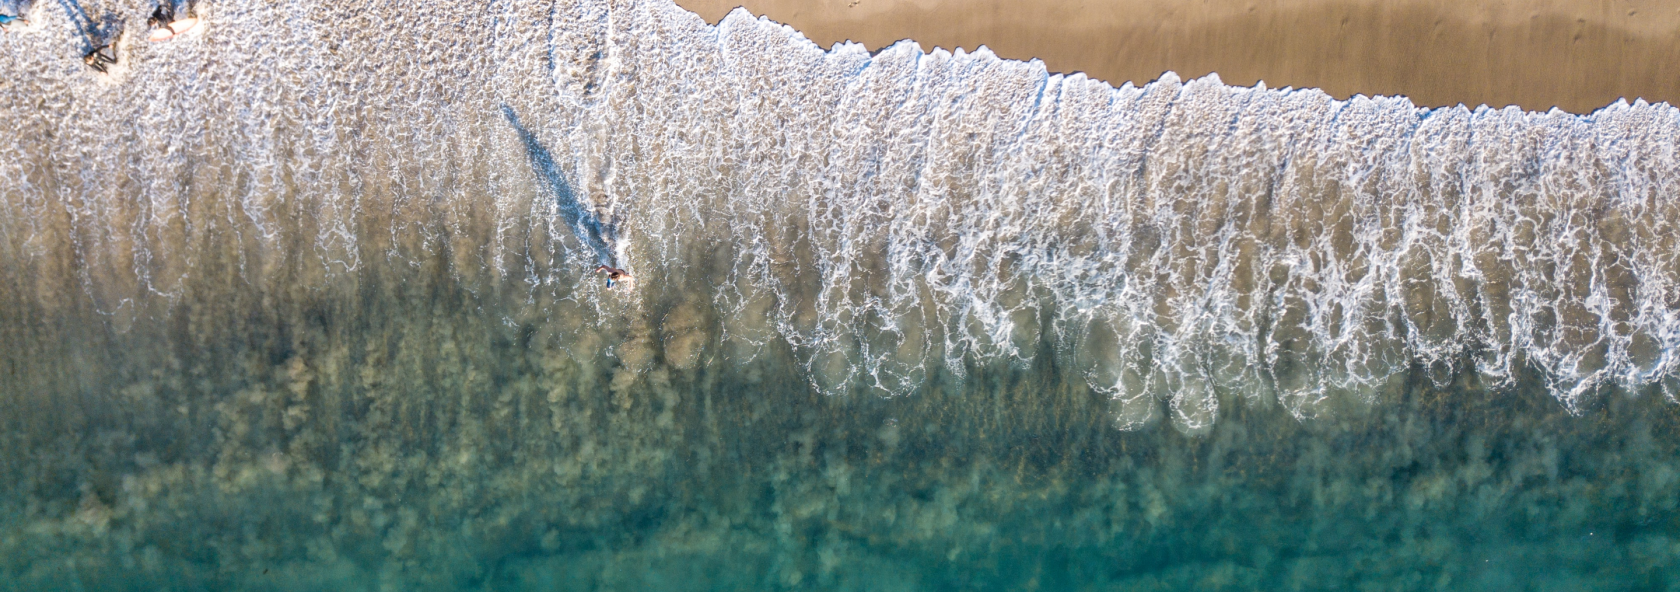 Top view of waves on a sand beach